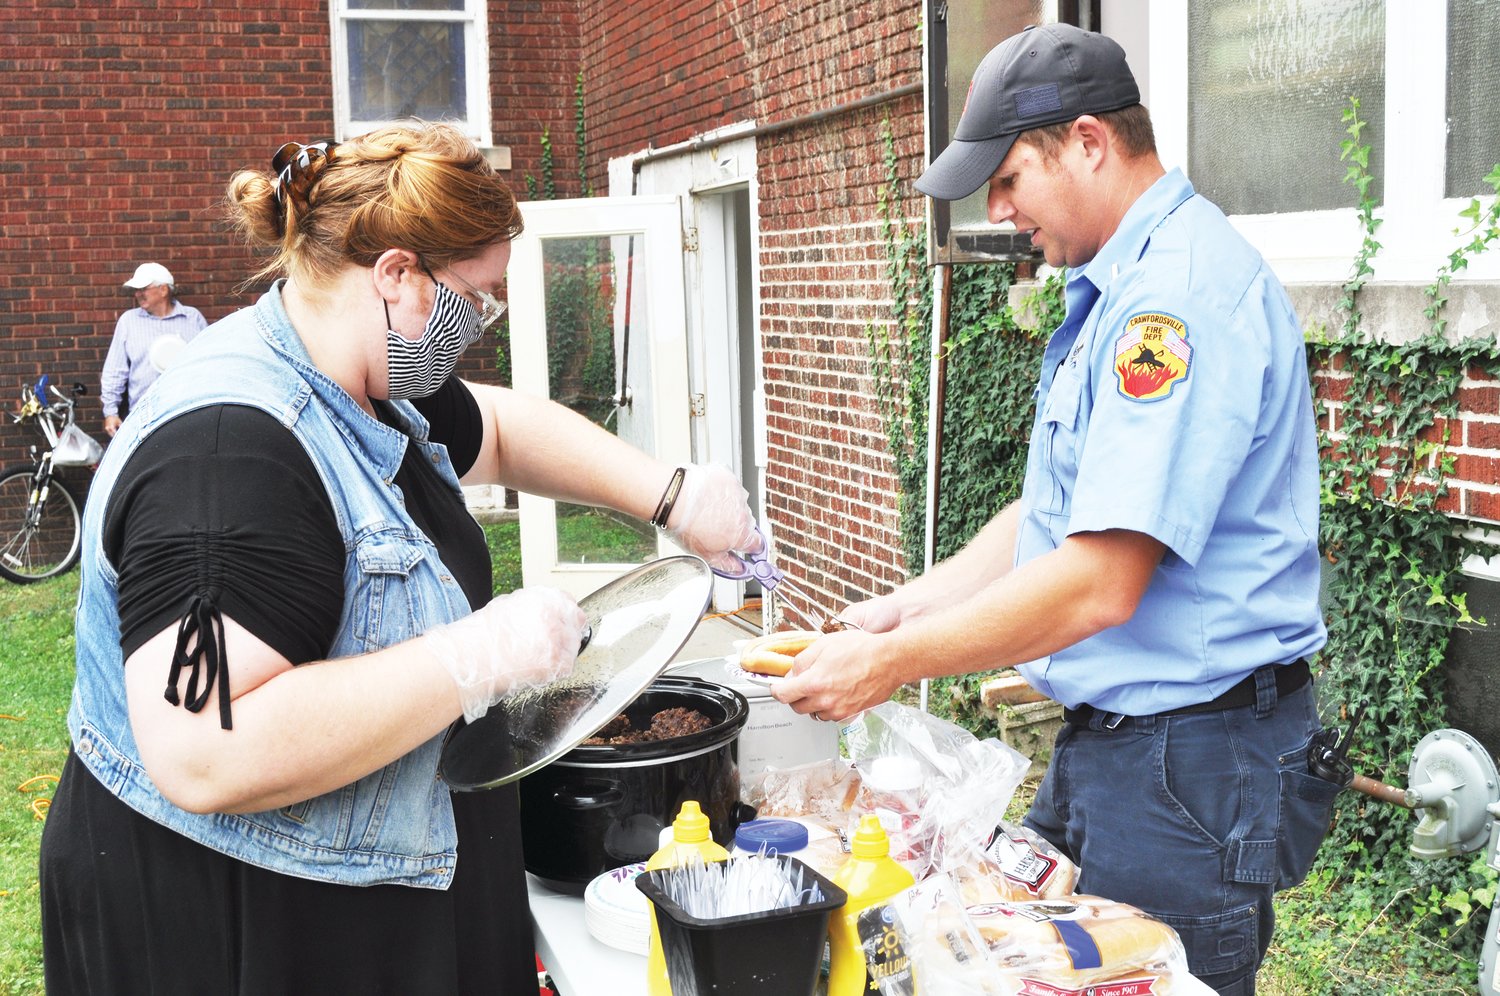 Praise Sharp dishes up a hot dog for CJ Mullett of the Crawfordsville Fire/EMS Department Saturday at The Pentecostals of Crawfordsville. To recognize the 19th anniversary of the Sept. 11 attacks, the church held a cookout for local first responders and military personnel.